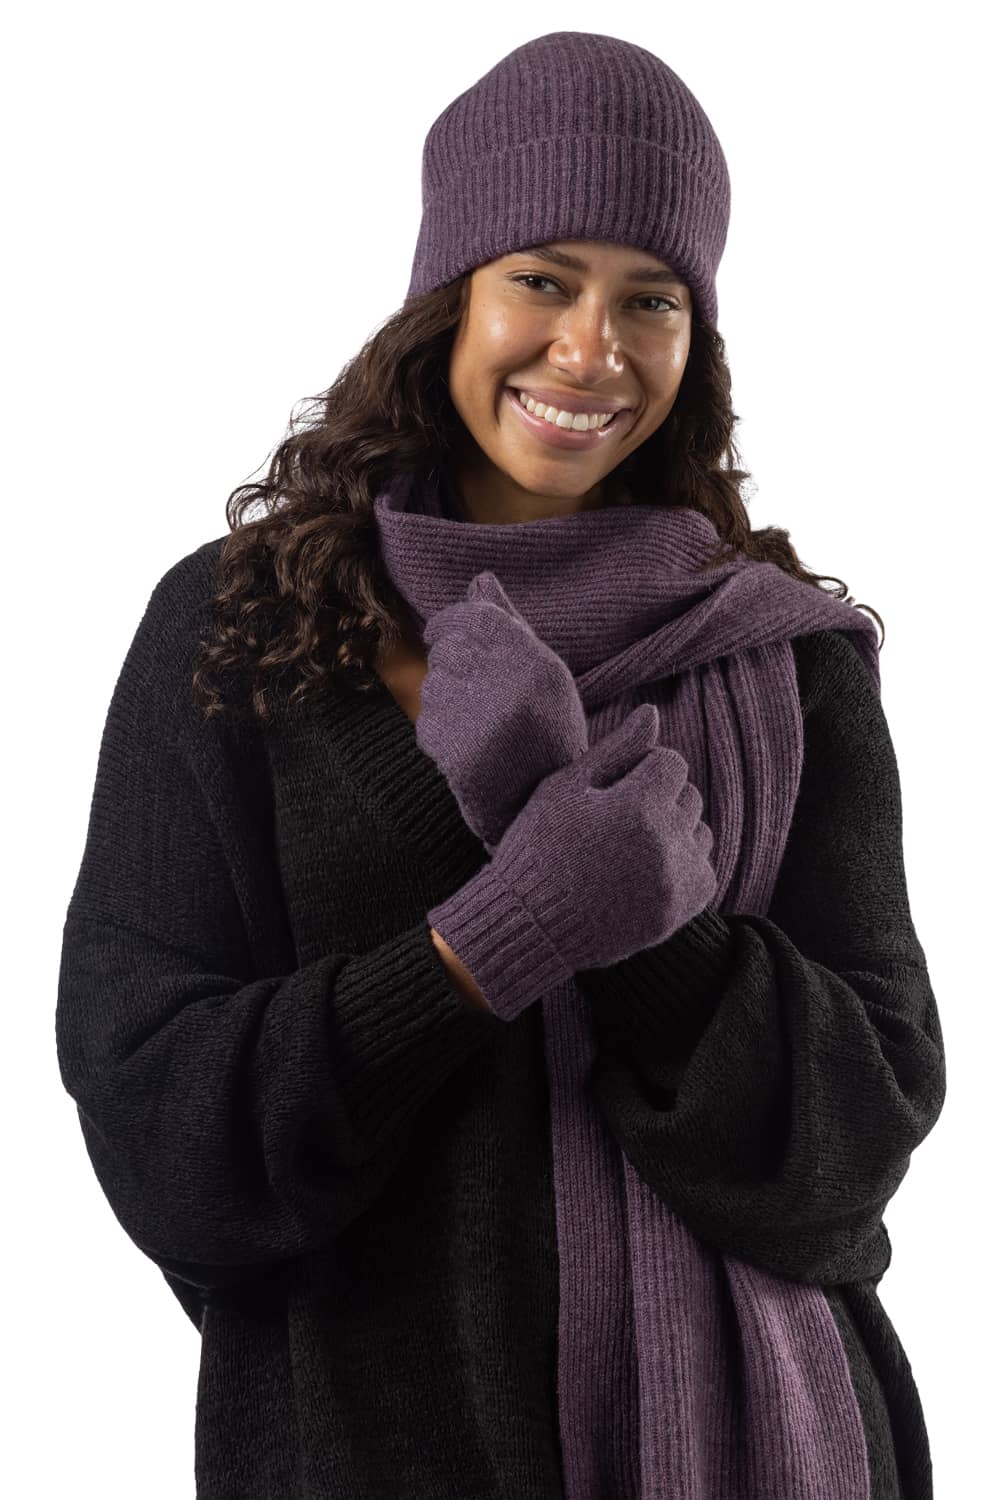 Fishers Finery 100 % Pure Cashmere Hat, Gloves, Scarf Gift Set-One Size / Red, Women's